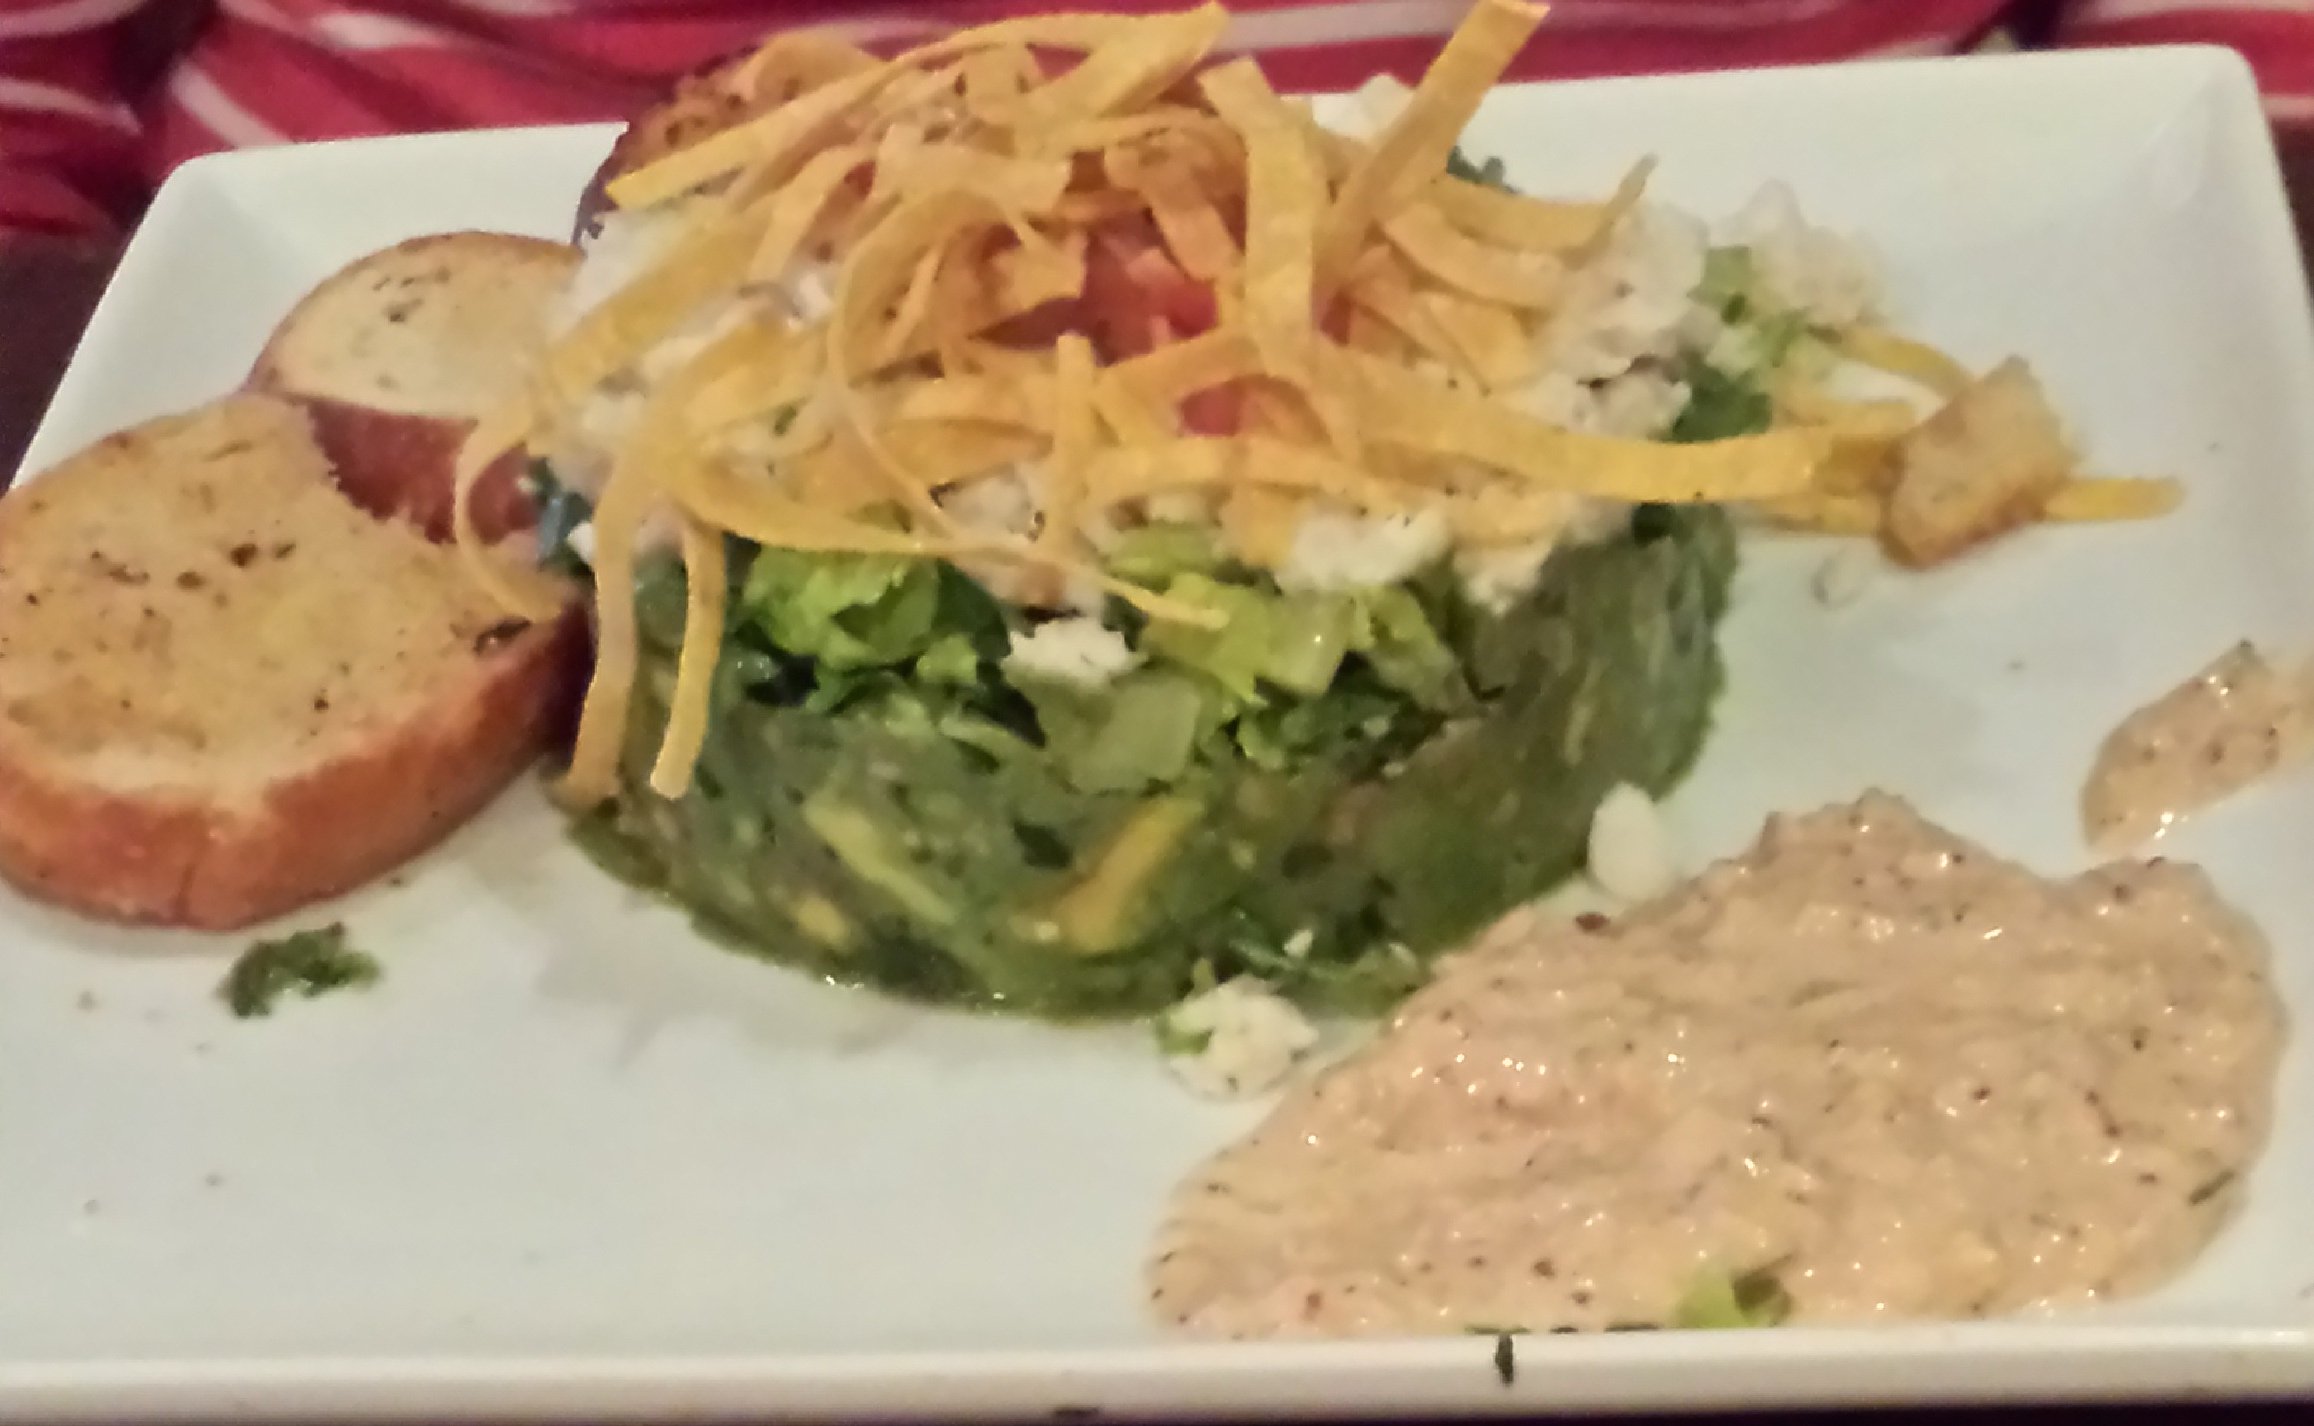 A lovely lump crab salad in an avocado base with crisp chips on top from Texas Land and Cattle